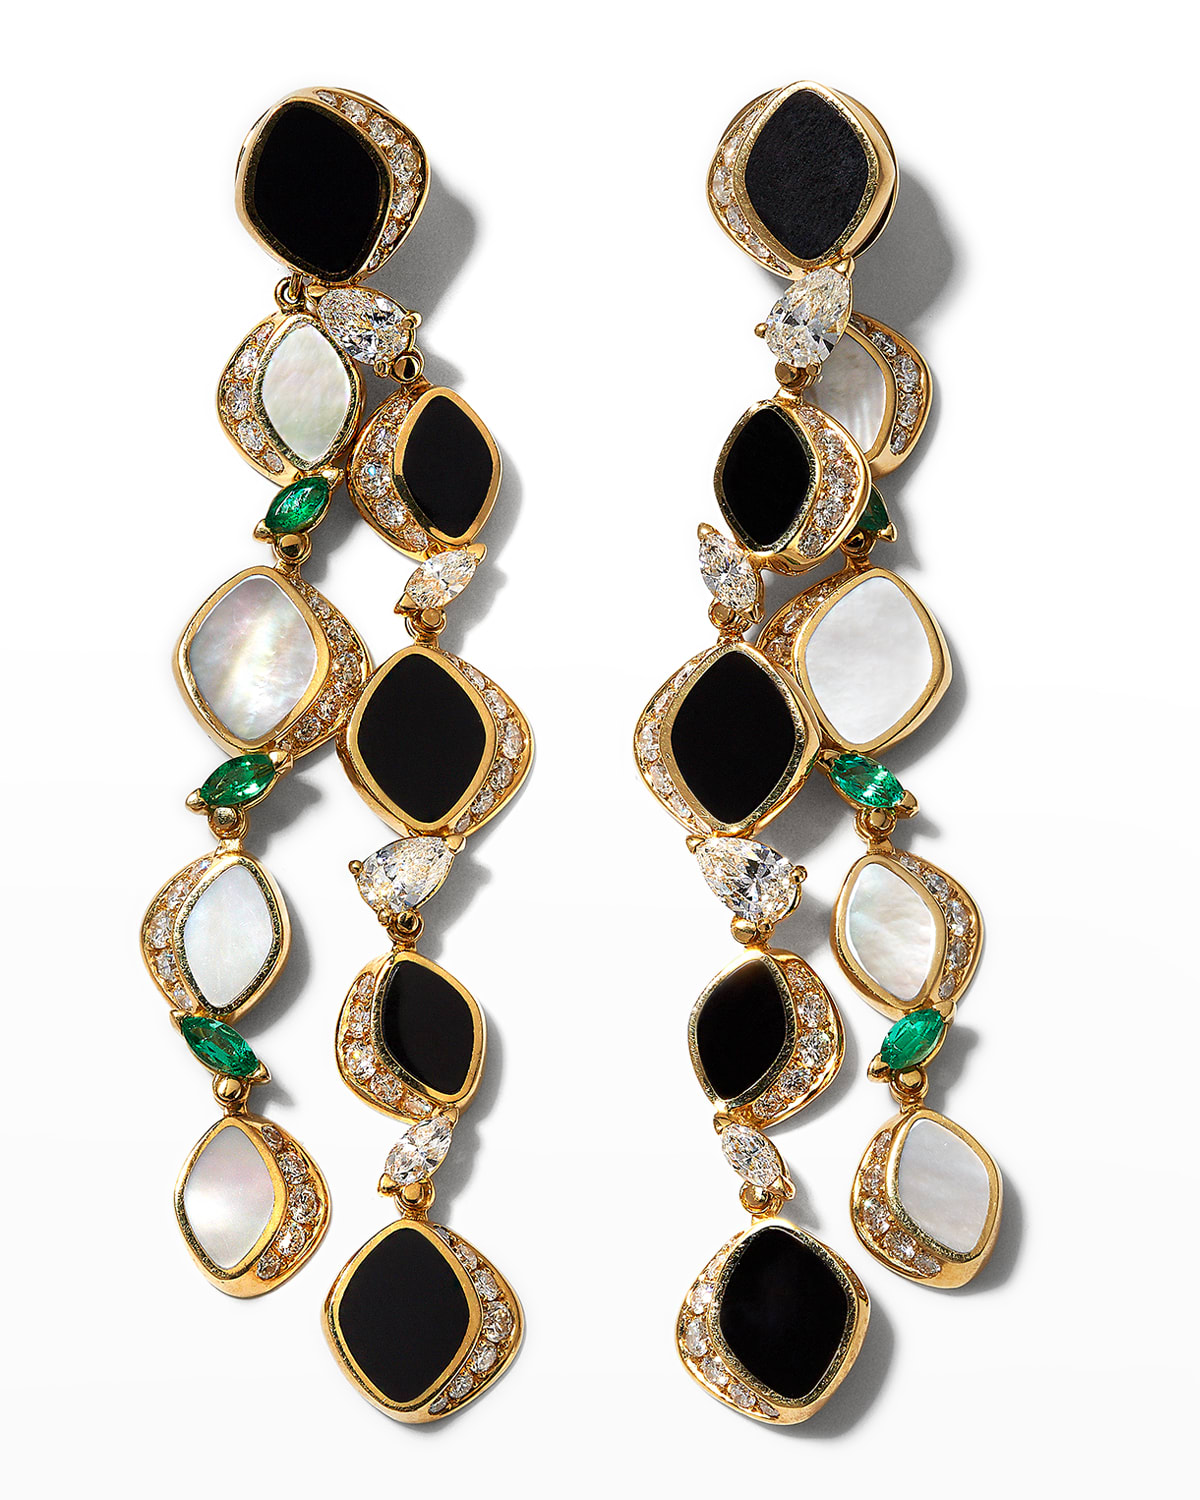 Vendorafa Yellow Gold Pebble Earrings With Mother-of-pearl, Diamonds And Emeralds